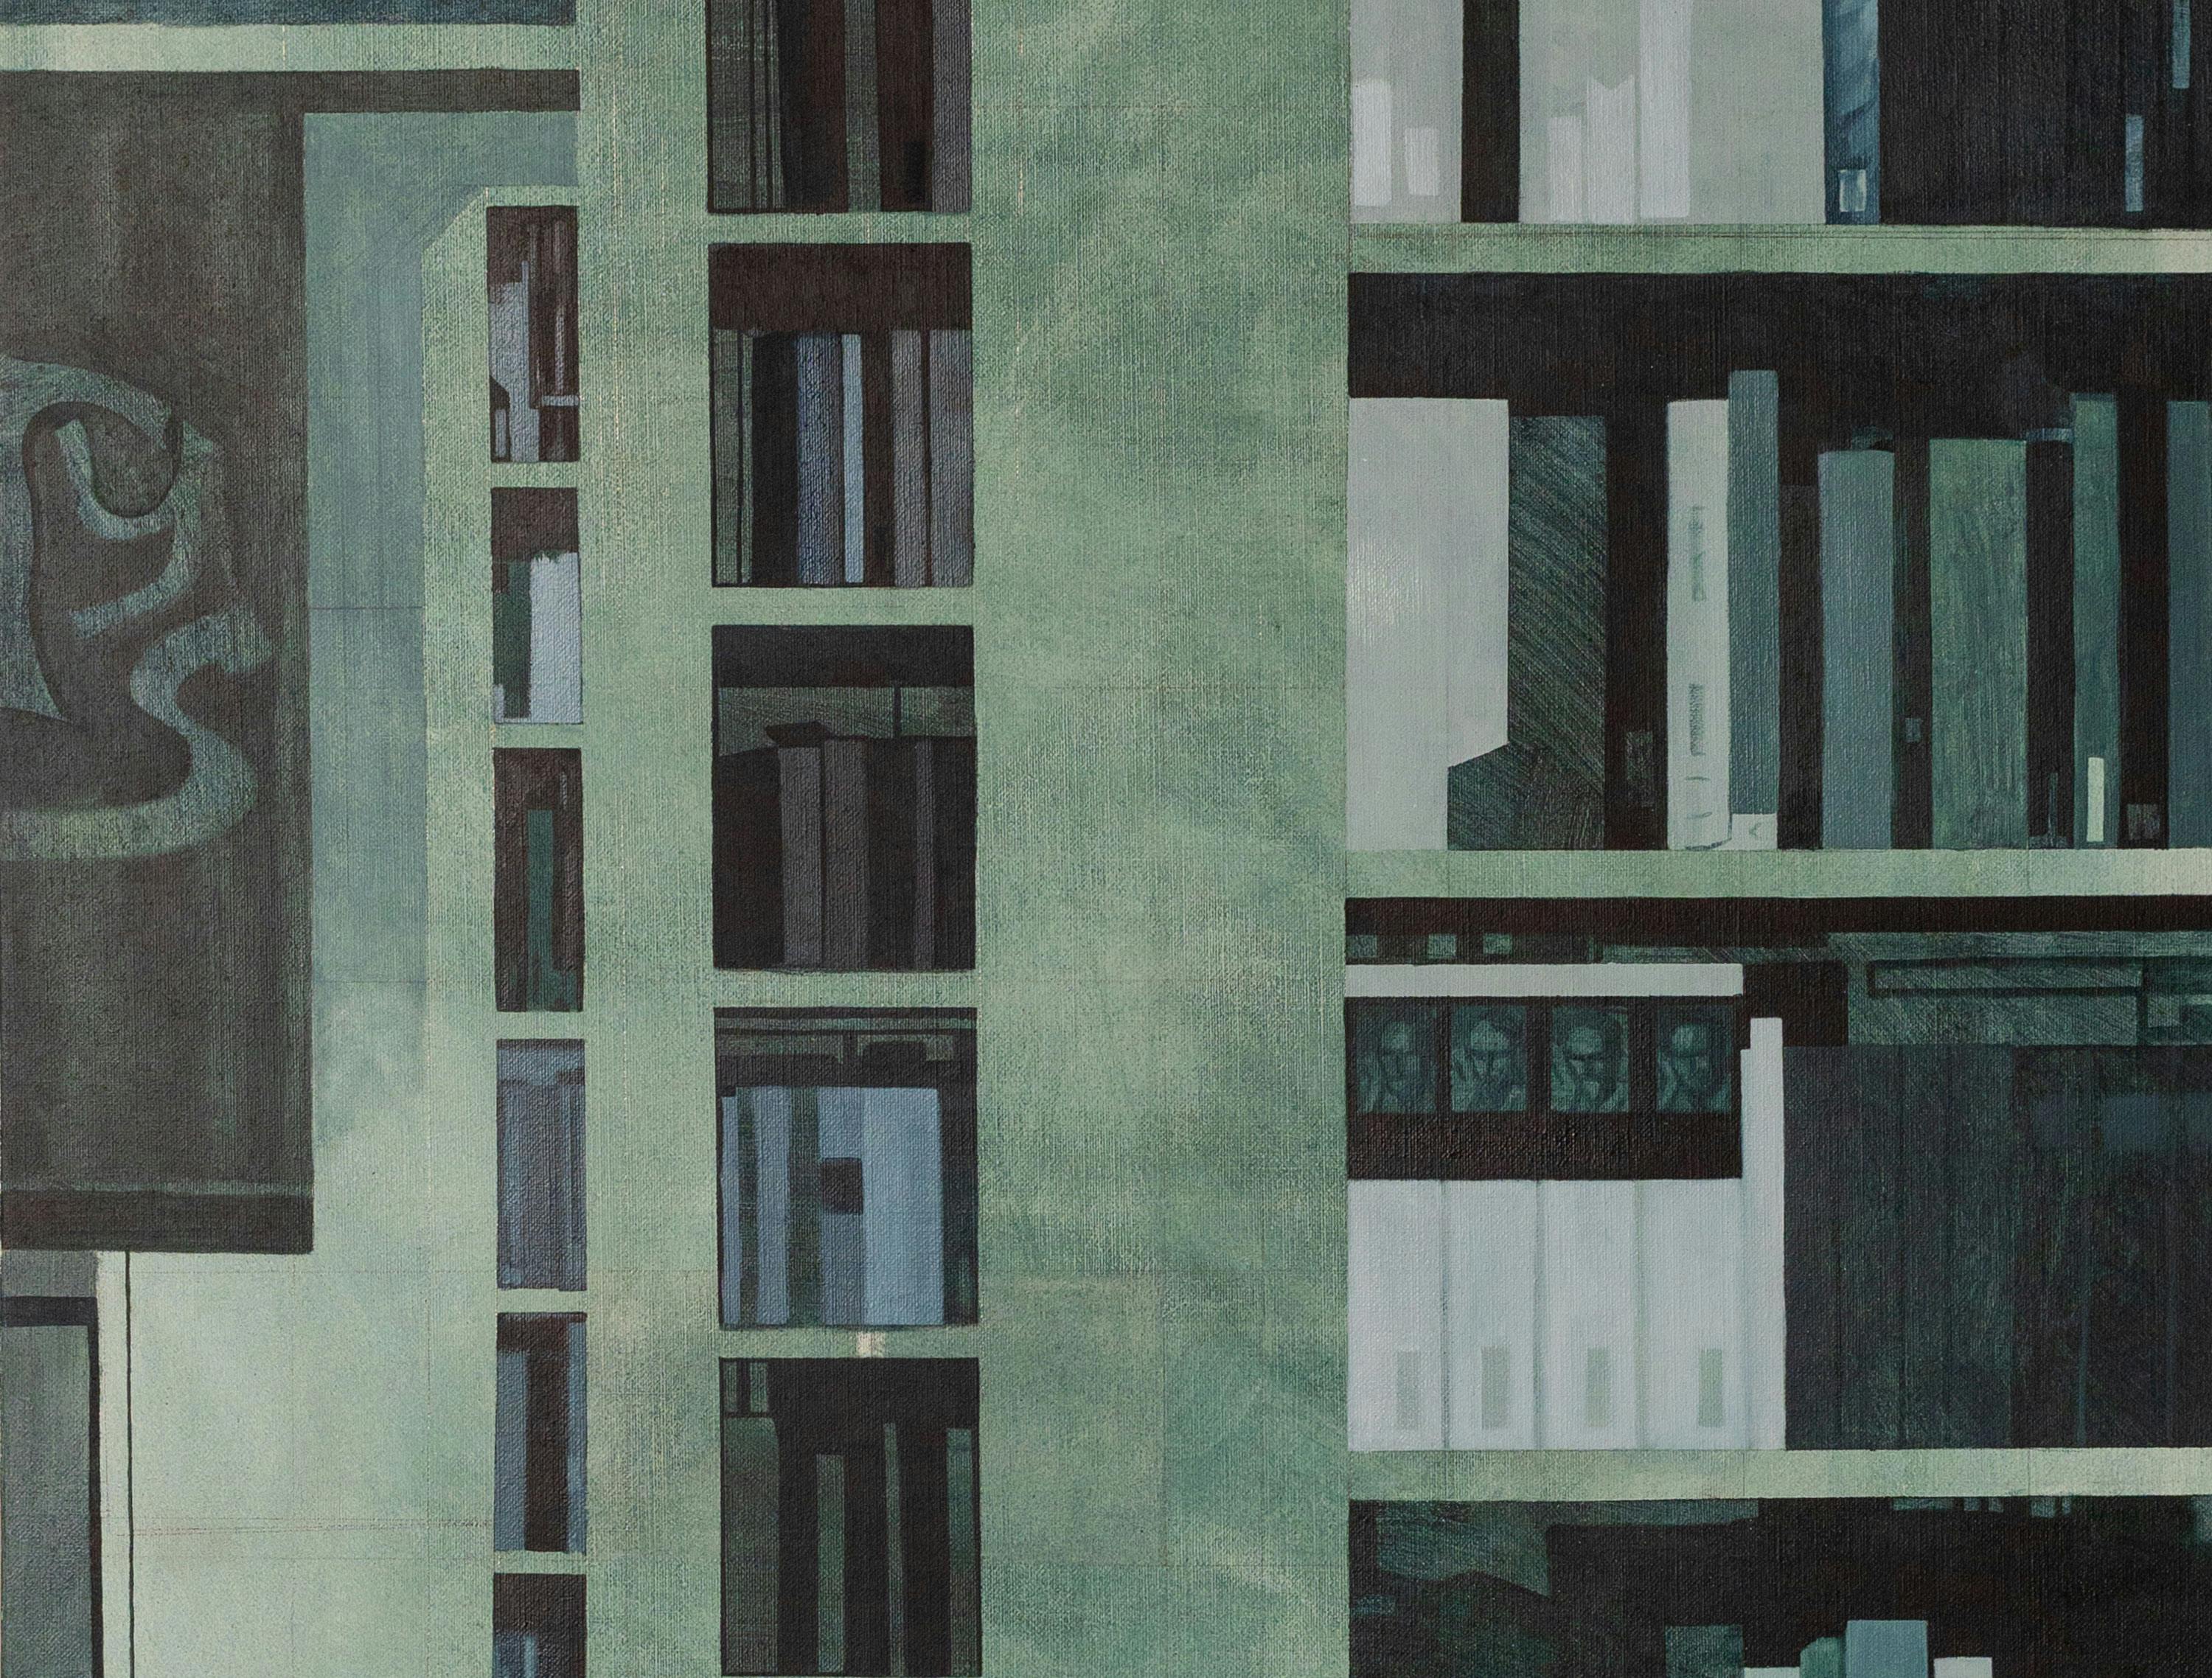 An artwork depicting shelves lined with files, books and other documents in green hues